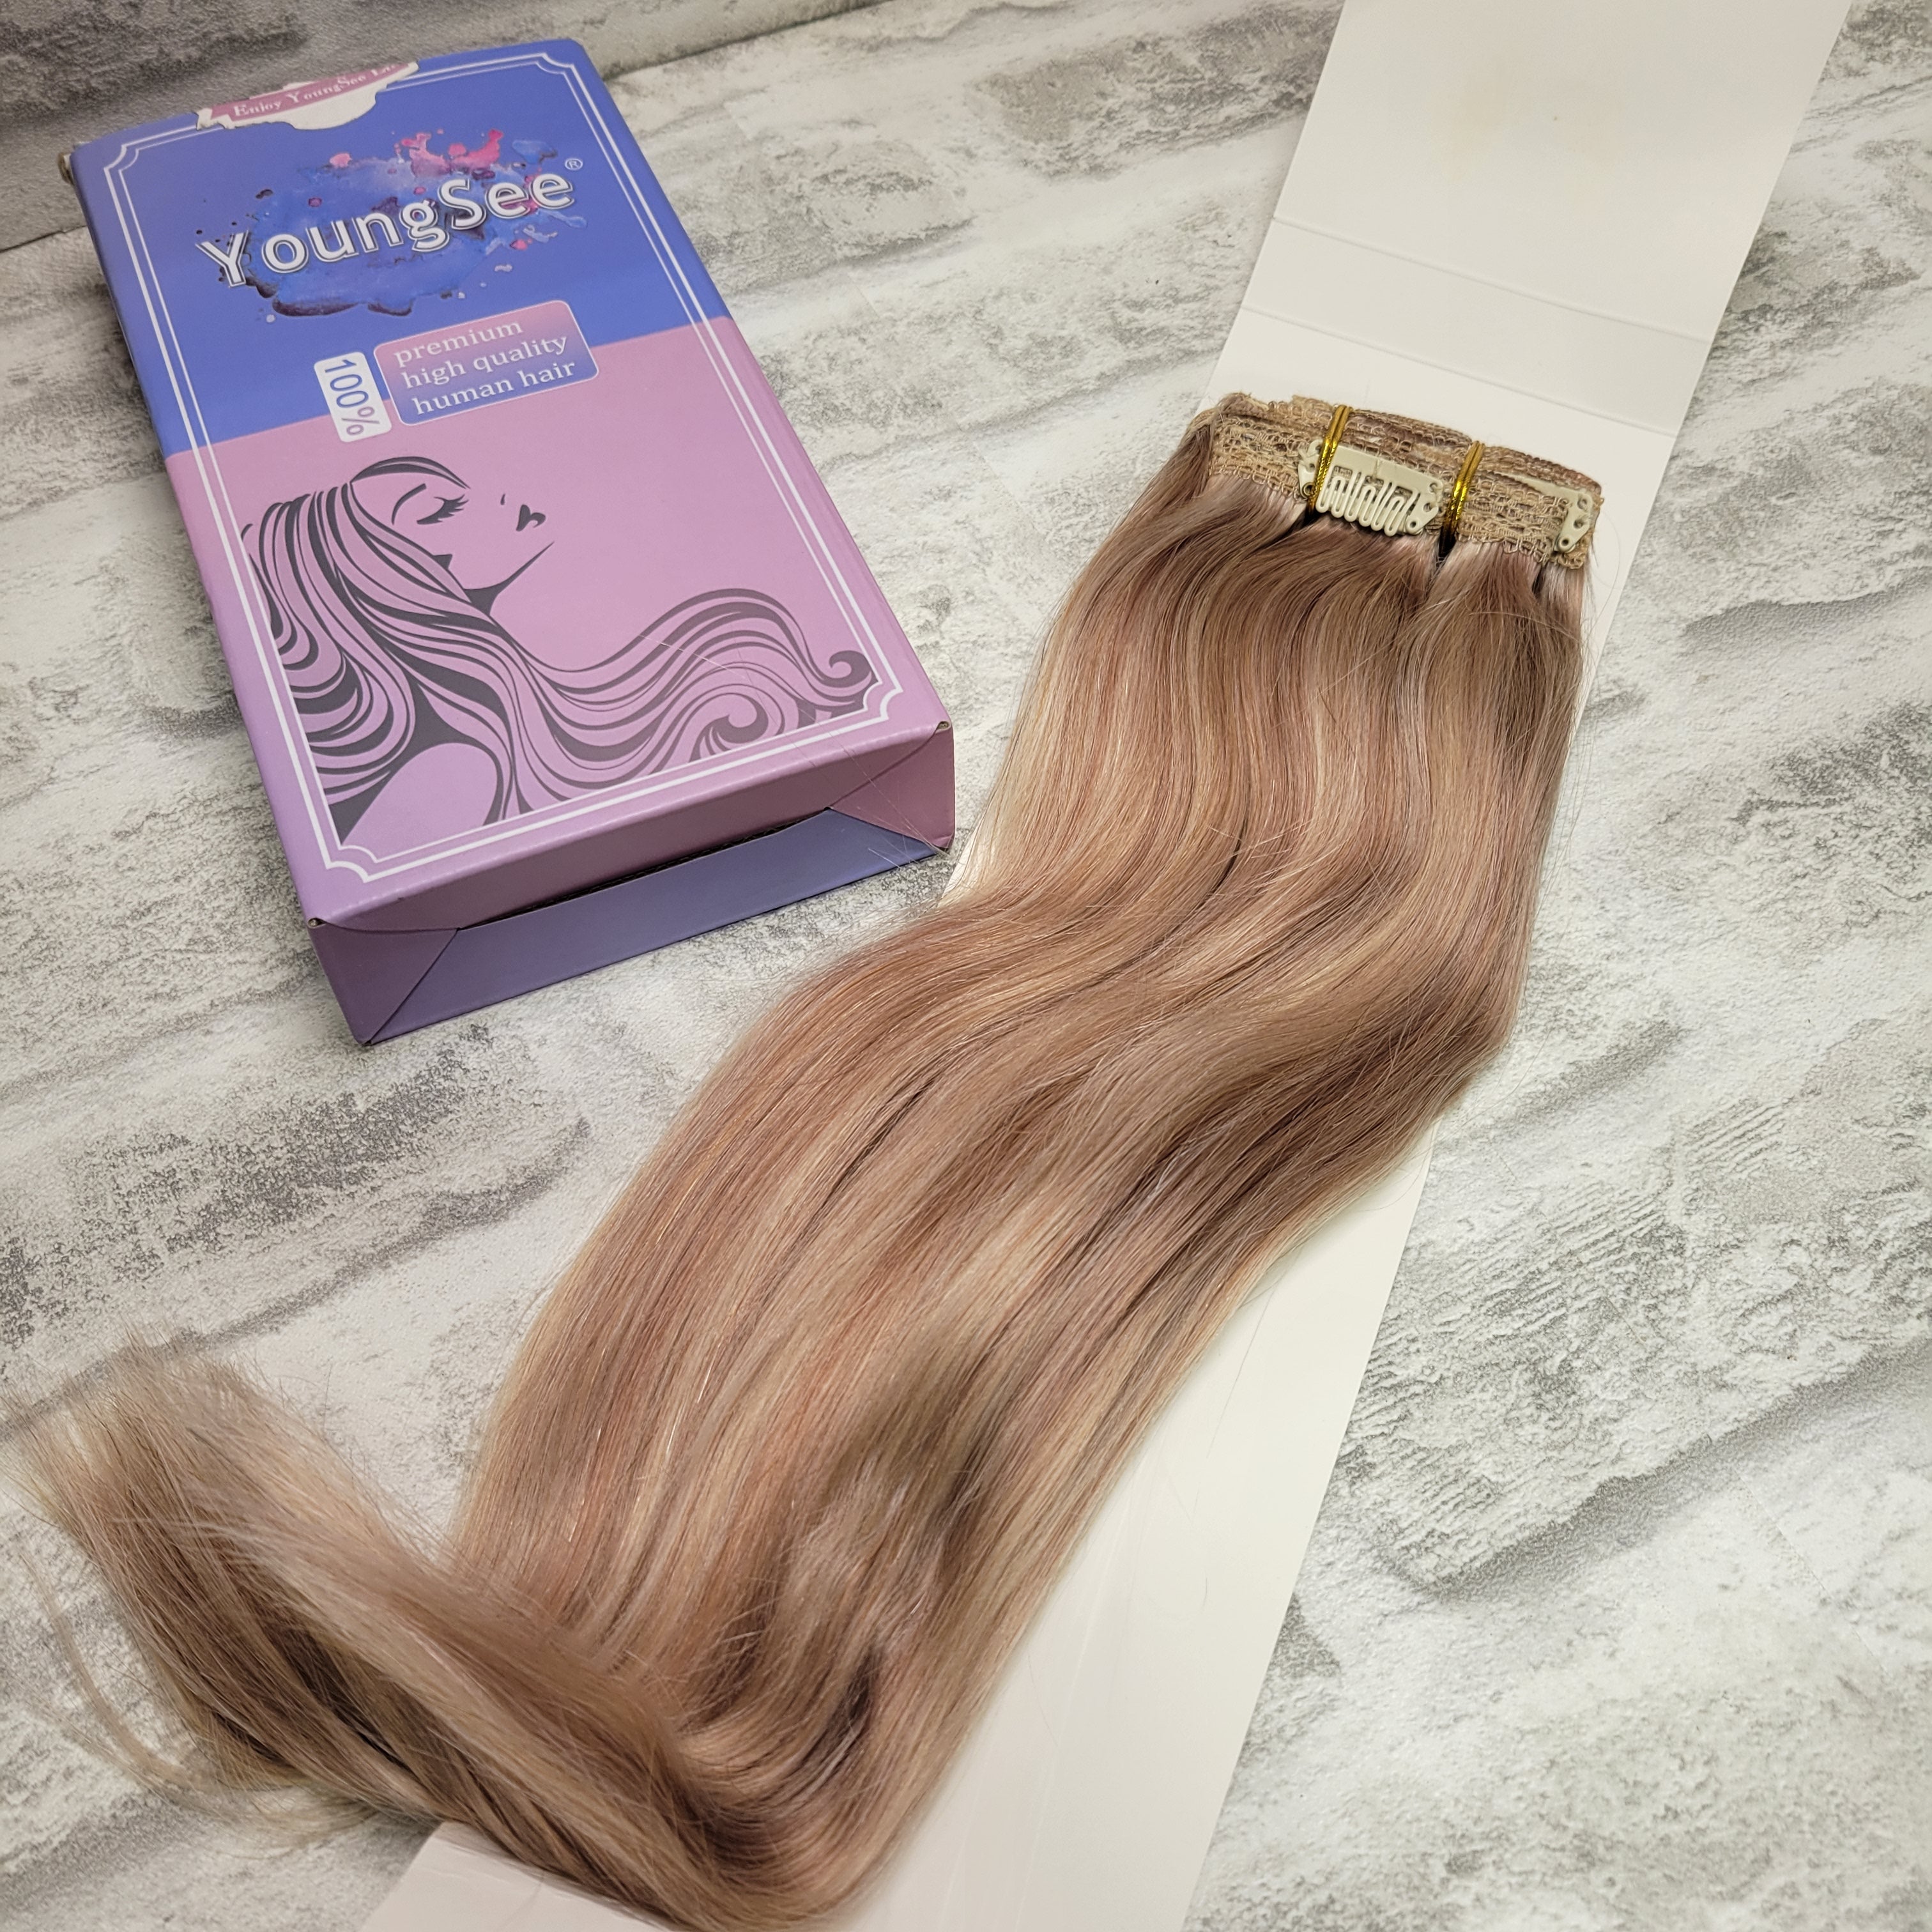 Young See Clip-In Human Hair Extensions 14